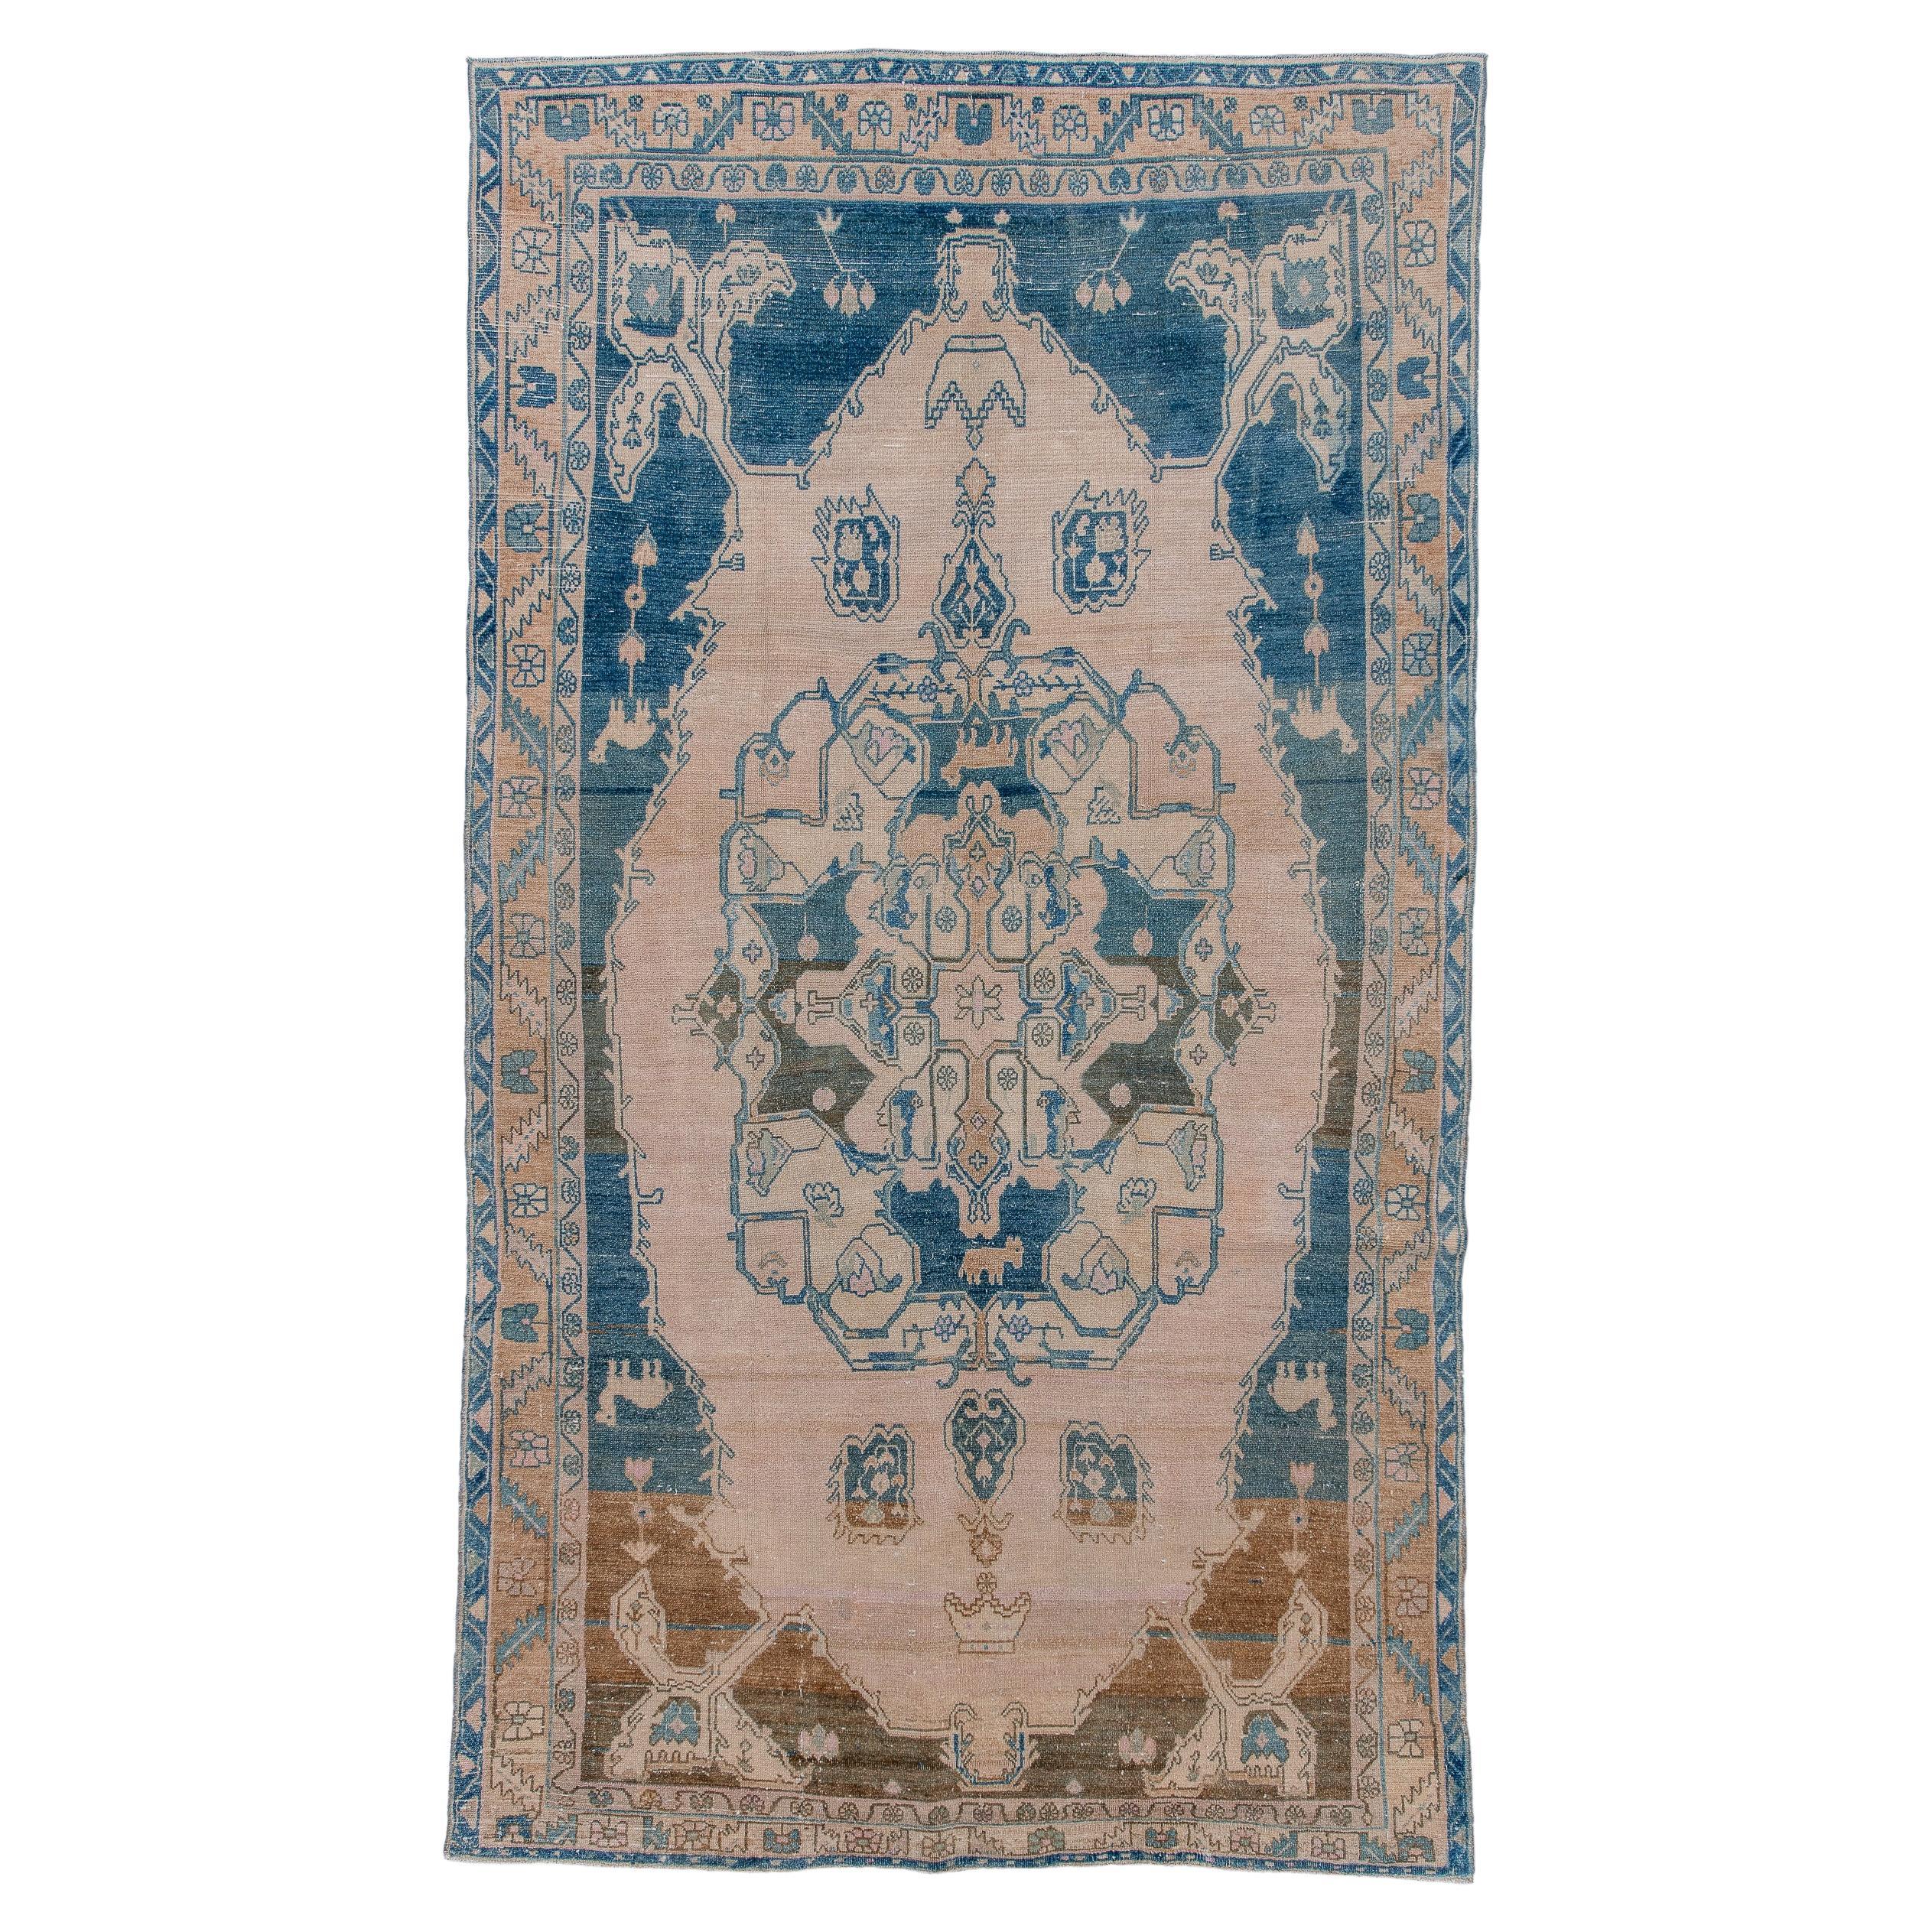 Antique Malayer Grand Medallion Rug 1950s - Cornflower Blue and Creamfstyle For Sale